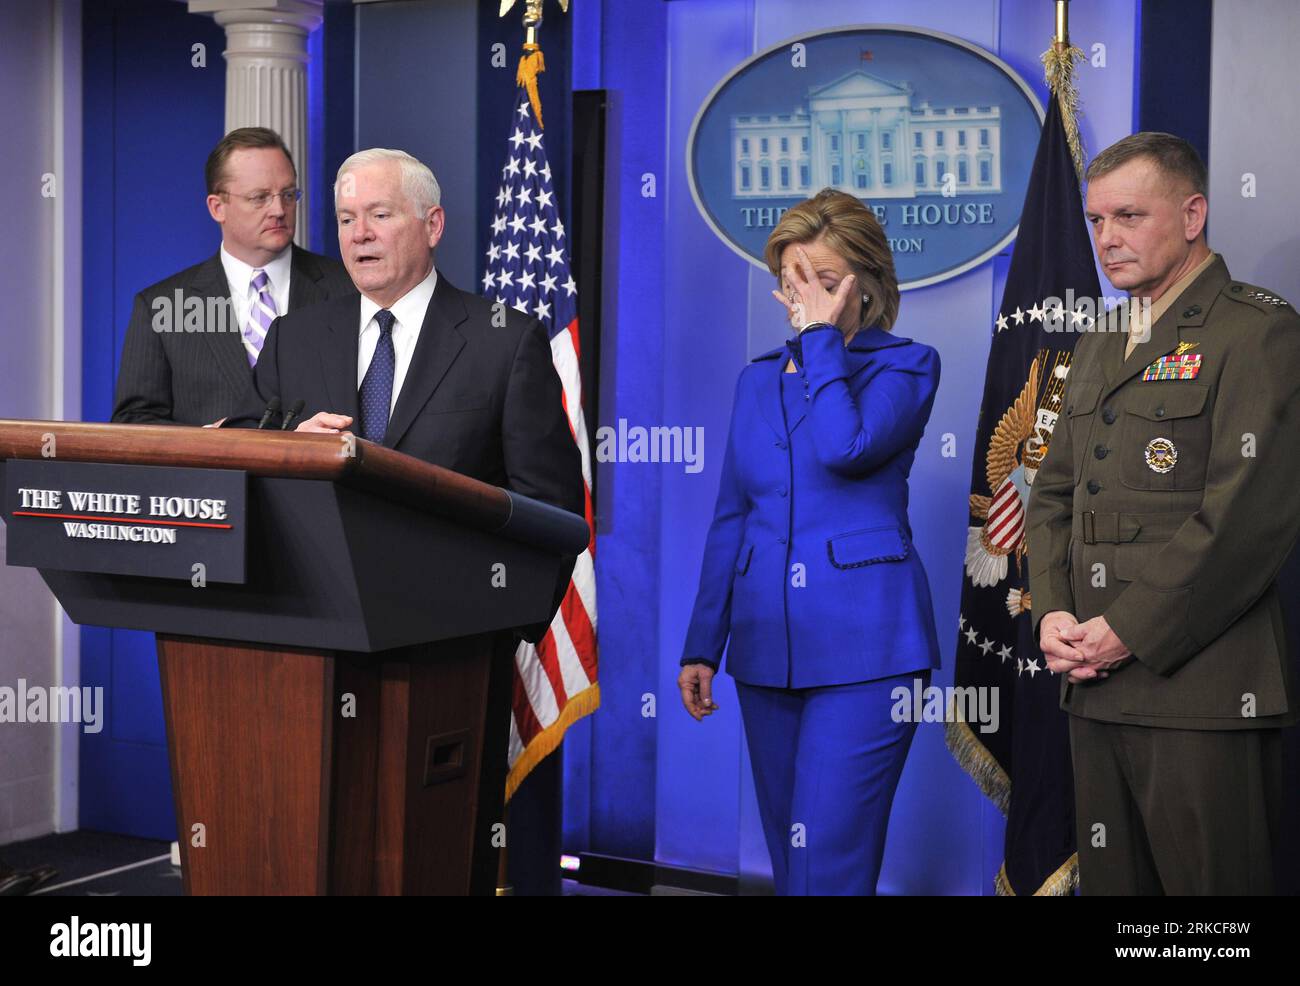 Bildnummer: 54756959  Datum: 16.12.2010  Copyright: imago/Xinhua (101217) -- WASHINGTON, Dec. 17, 2010 (Xinhua) -- White House Press Secretary Robert Gibbs, Secretary of Defense Robert Gates, Secretary of State Hillary Clinton and Vice Chairman of the U.S. Joint Chiefs of Staff General James Cartwright (L-R) attend a briefing on the Afghanistan and Pakistan Annual Review in the White House in Washington D.C., the United States, Dec. 16, 2010.  (Xinhua/Zhang Jun)(axy) U.S.-WASHINGTON-AFGHANISTAN-REVIEW PUBLICATIONxNOTxINxCHN People Politik kbdig xcb 2010 quer premiumd    Bildnummer 54756959 Dat Stock Photo